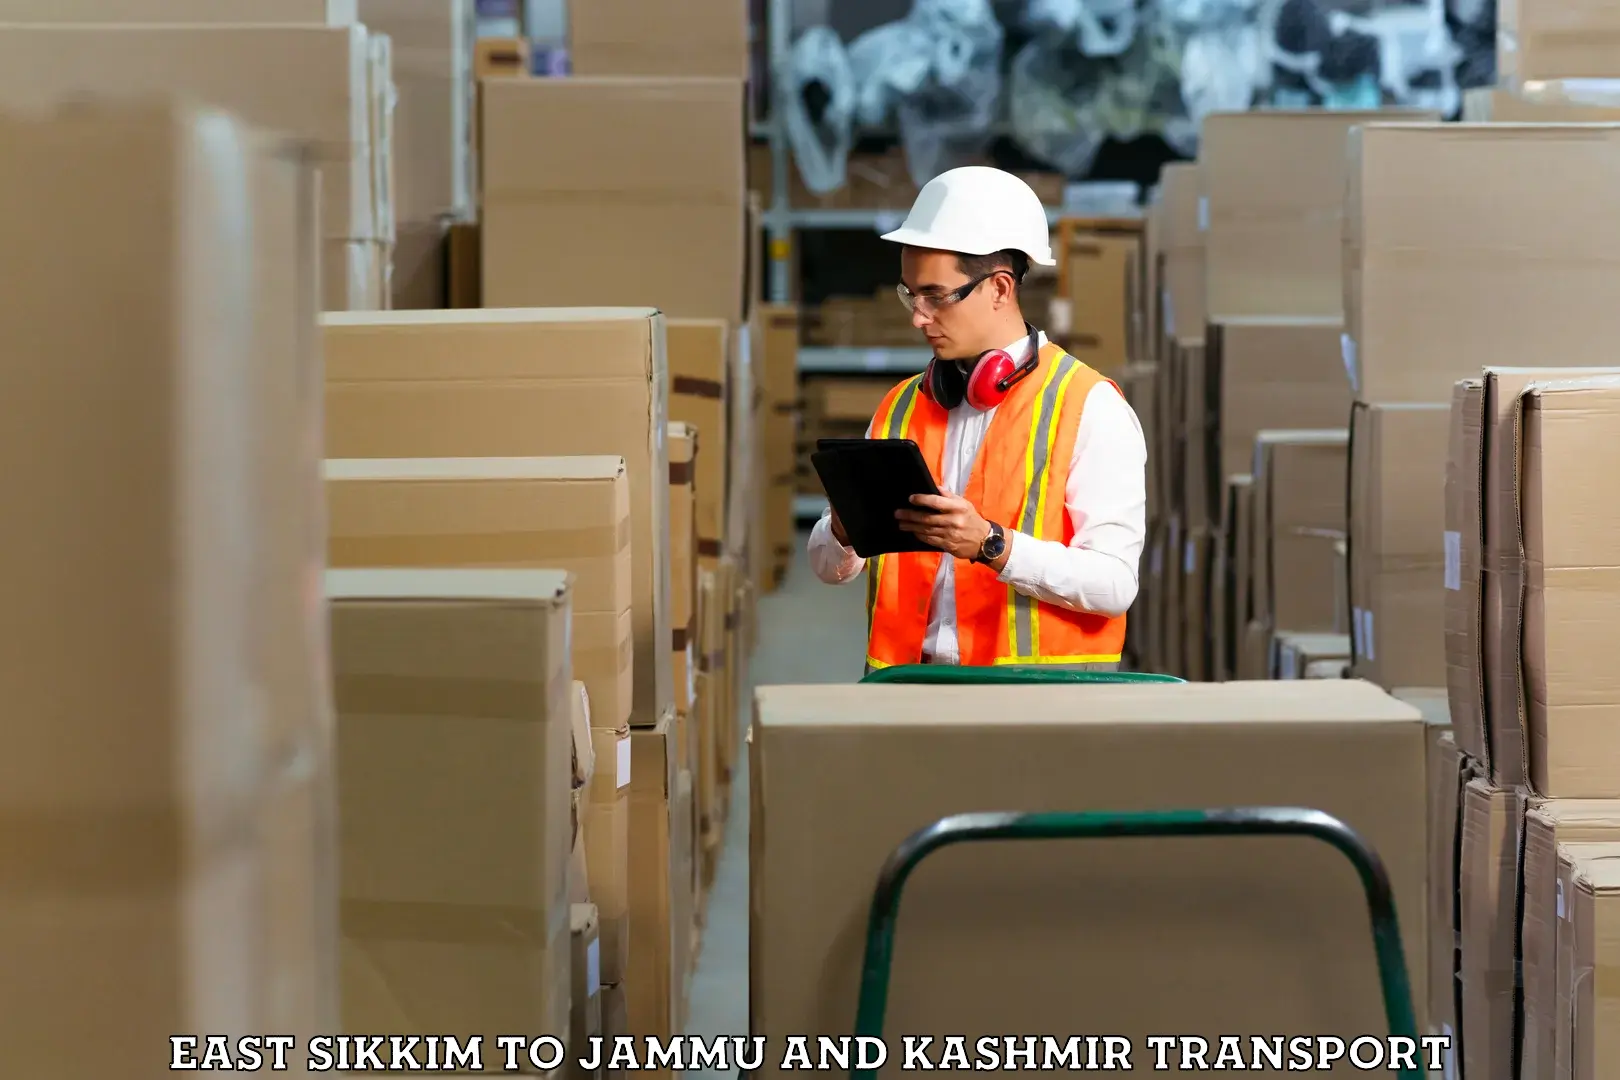 Daily parcel service transport East Sikkim to Jammu and Kashmir